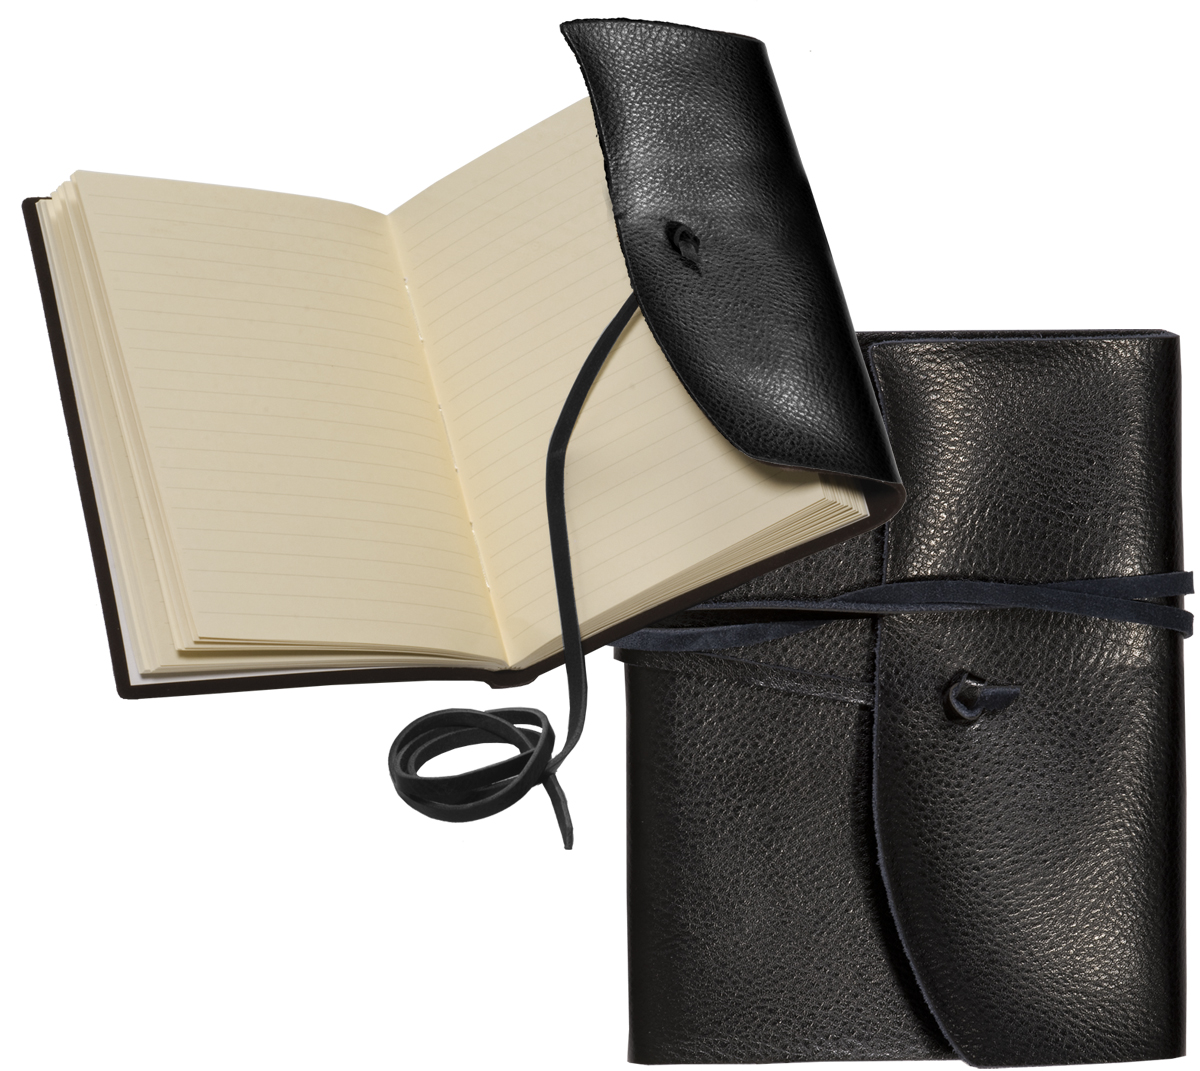 Americana Leather-Wrapped Journal